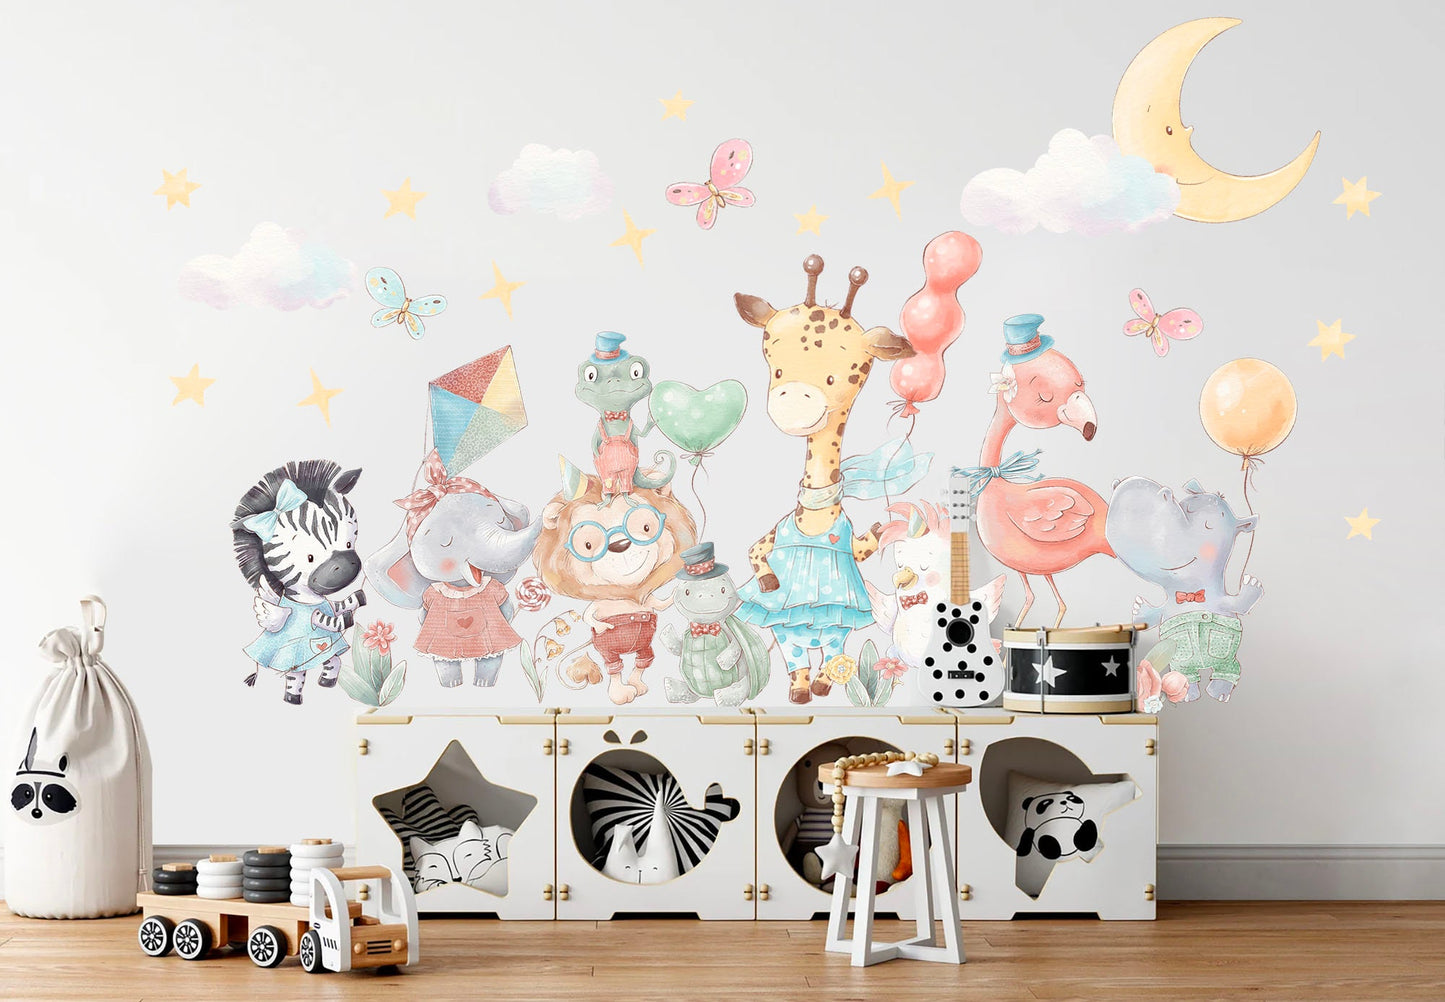 Animal Party Wall Decal - Giraffe, Elephant, Zebra with Balloons - Removable Peel and Stick - BR163